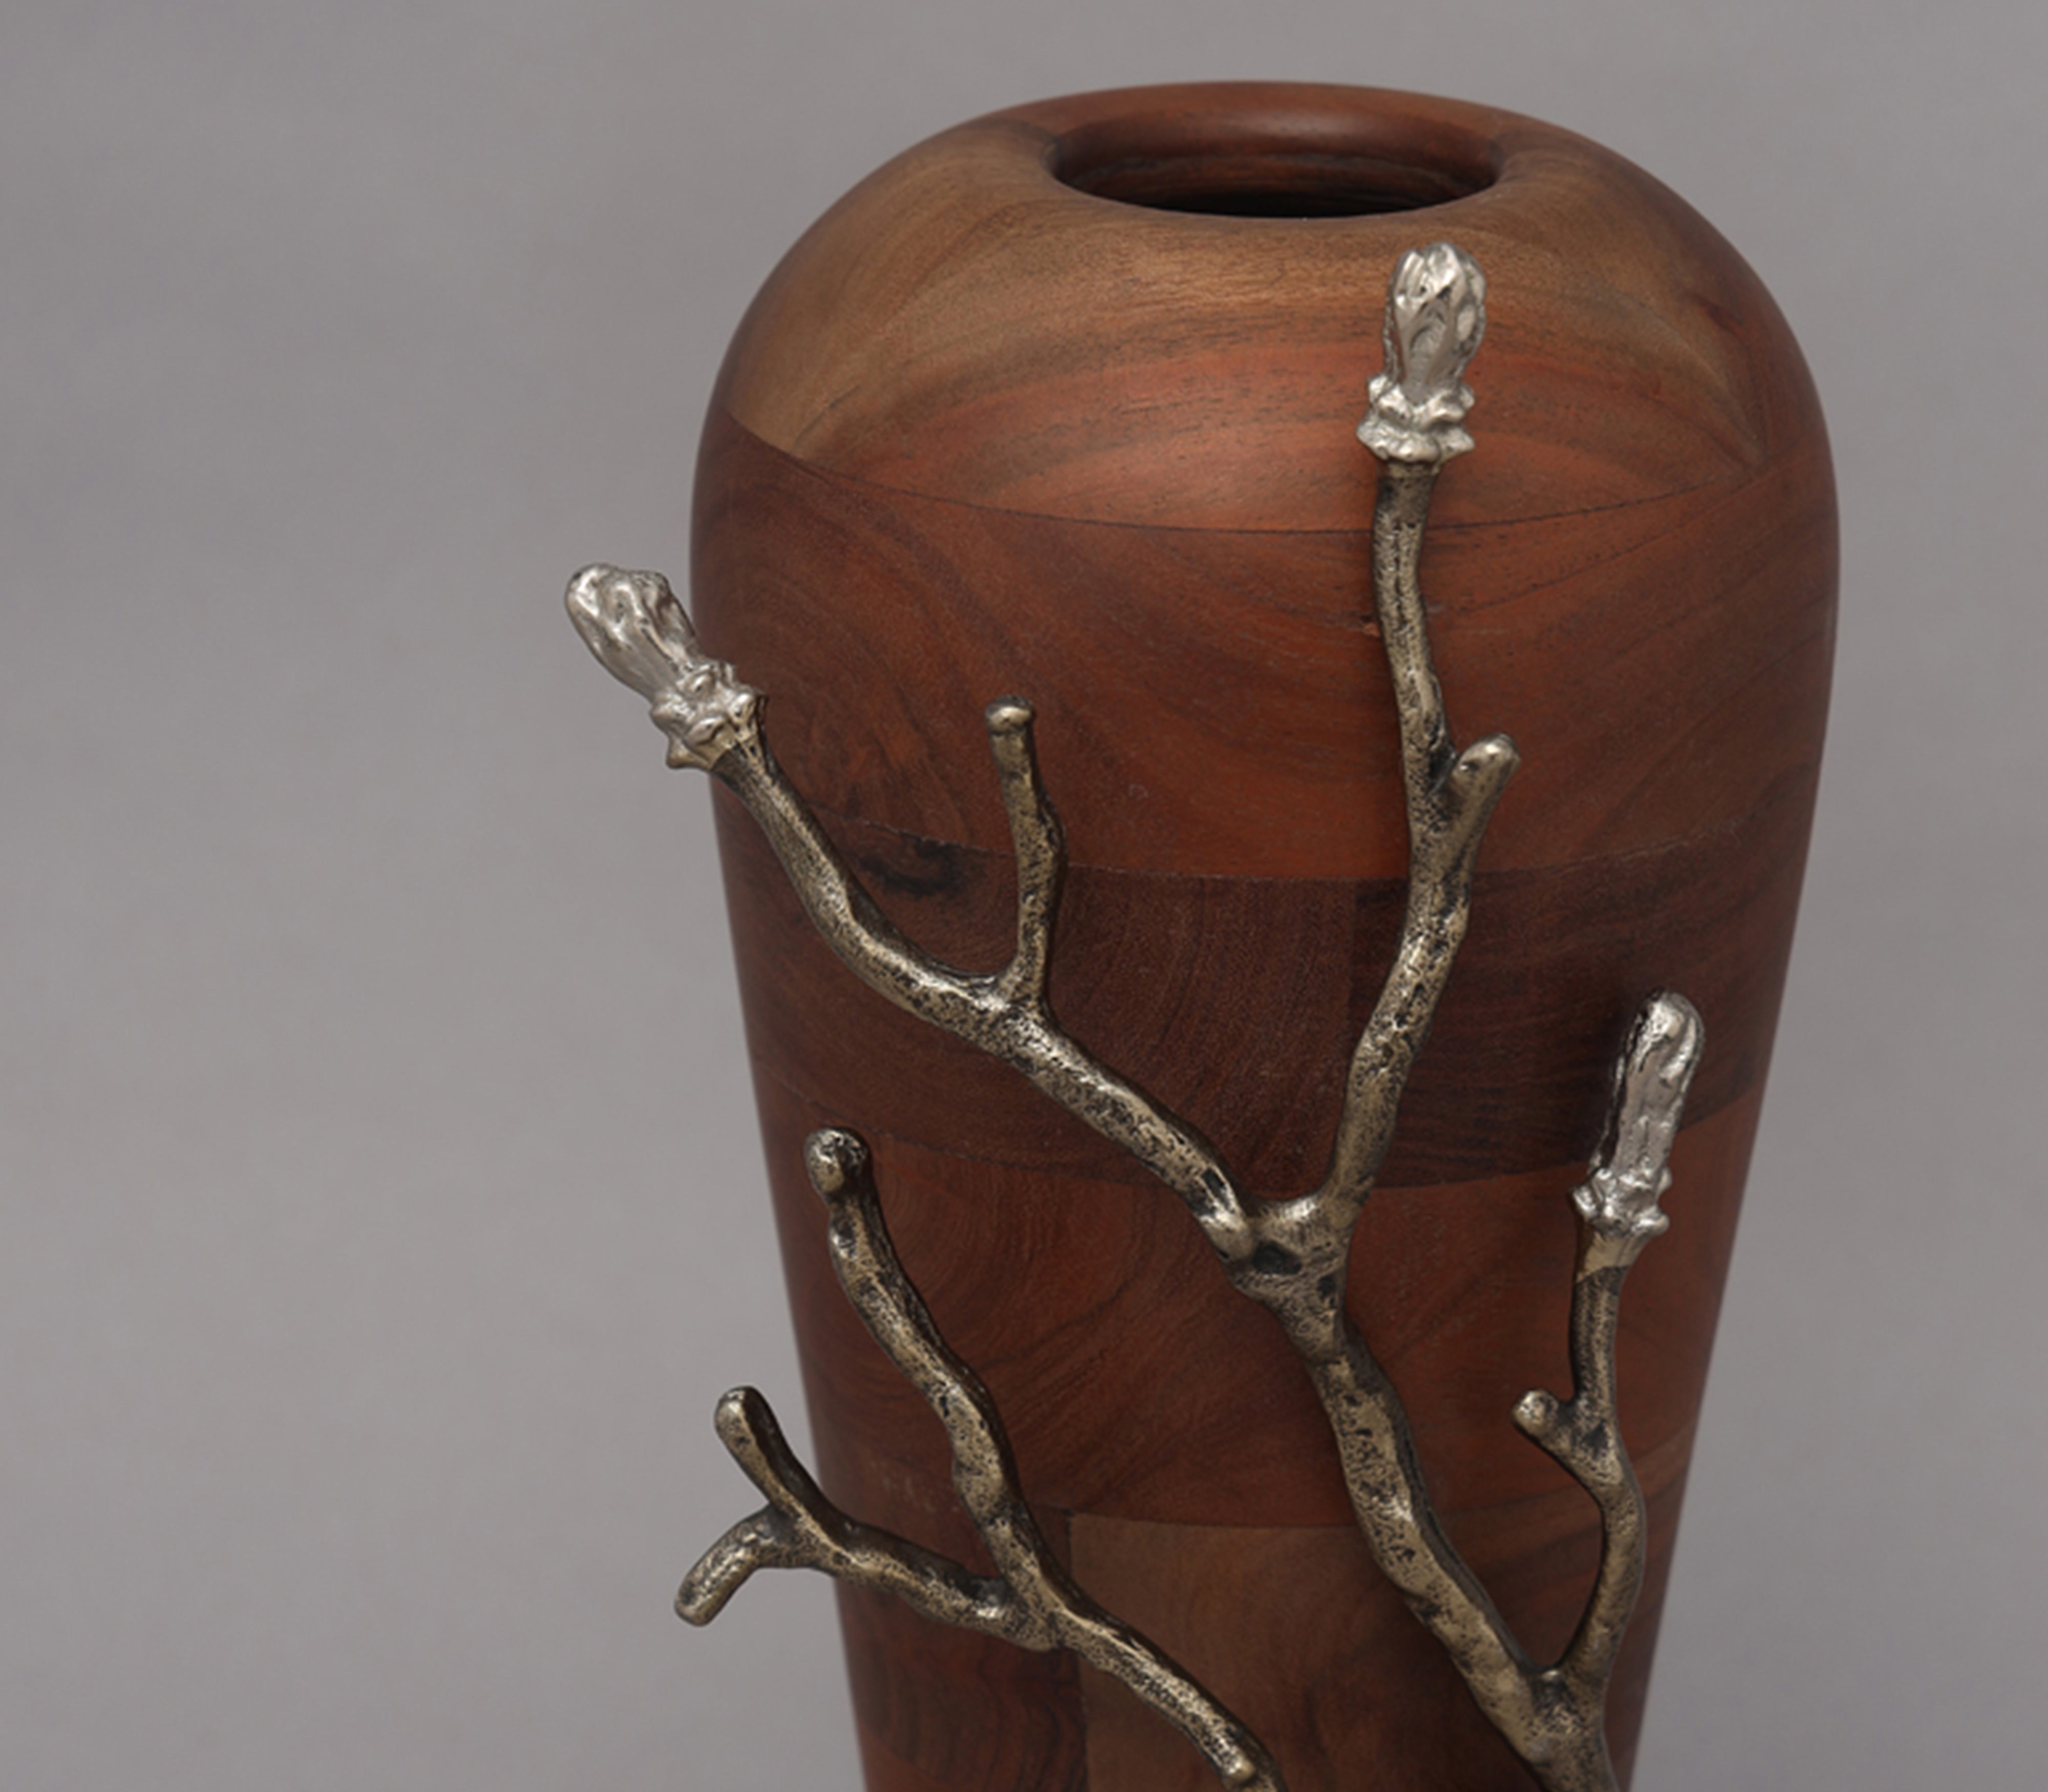 Buds with Wood Vase